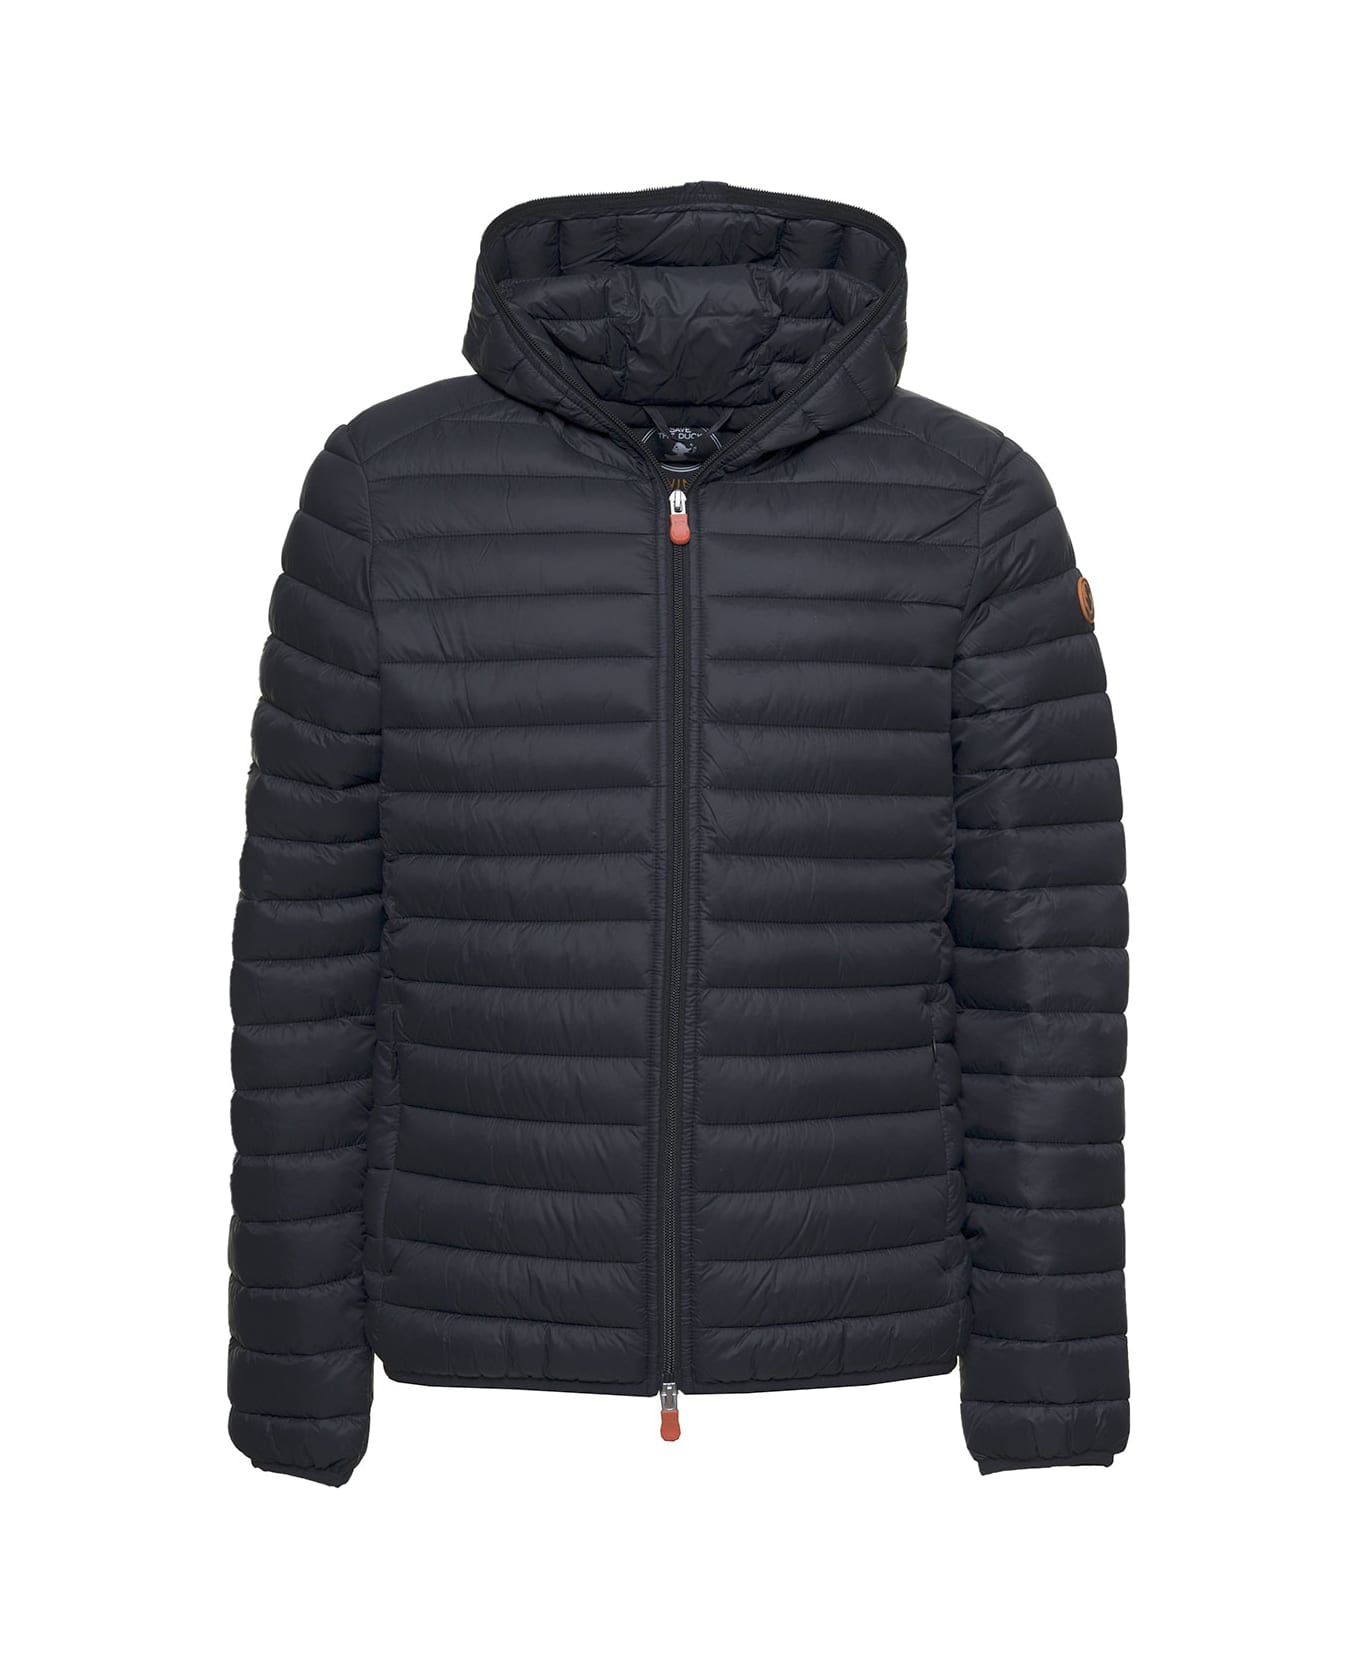 Save the Duck Ecological Black Quilted Nylon Down Jacket Man - Black ダウンジャケット